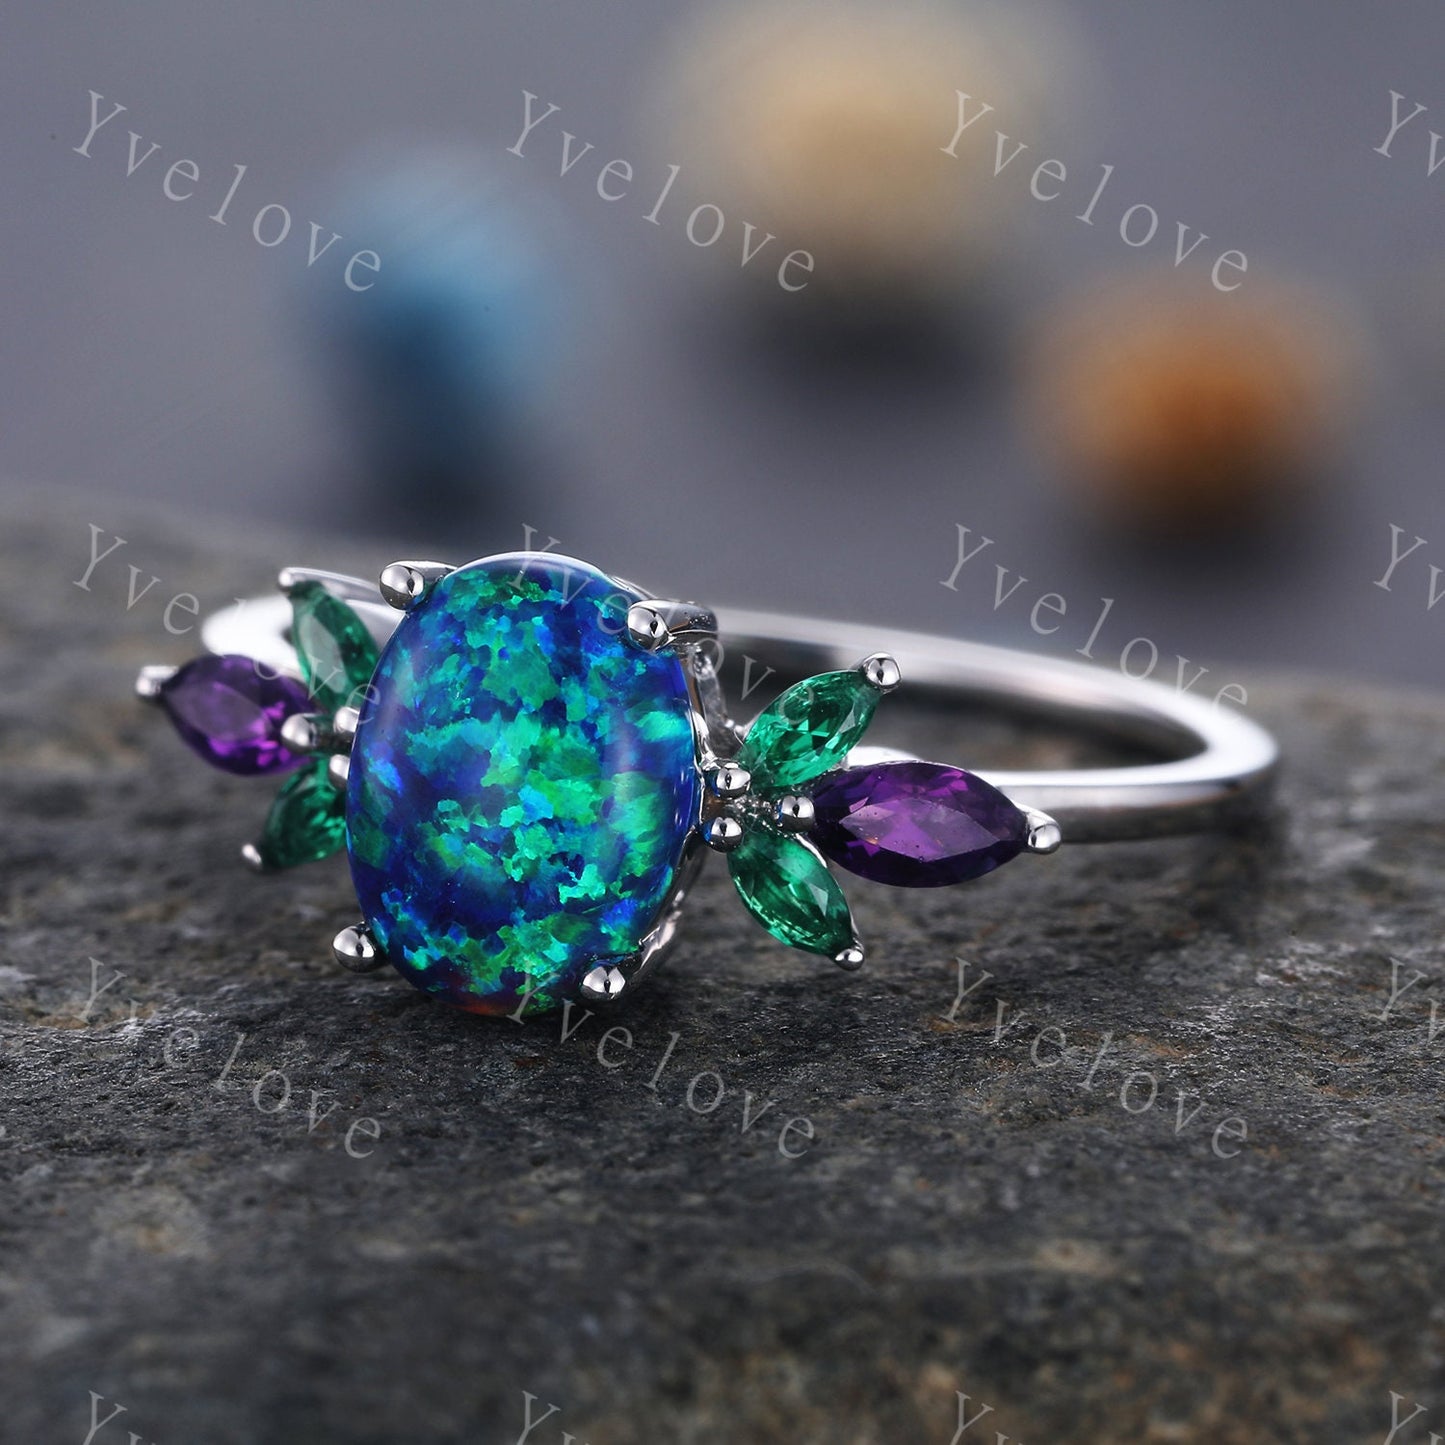 Blue Opal Engagement Ring White Gold Oval Opal Wedding Ring Opal Emerald Amethyst Floral Eternity Ring Vintage Design Valentines Gift to her